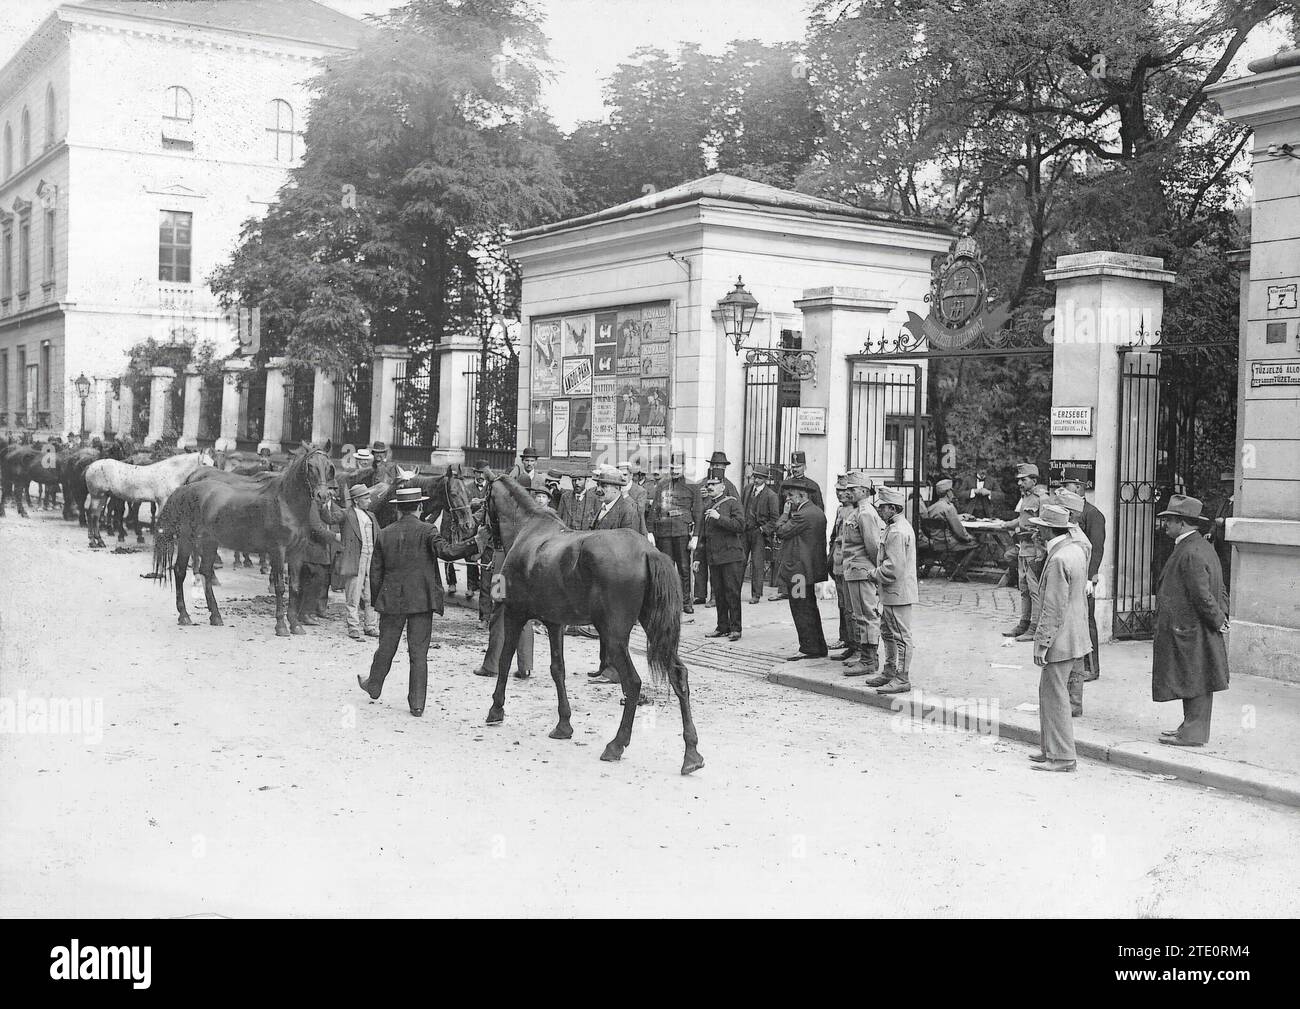 08/31/1914. The War in Austria-Hungary. Military and Government Commissions Requisitioning the Horses They Find for War. Photo: Ramón Parrondo y Pérez. Credit: Album / Archivo ABC / Parrondo Stock Photo